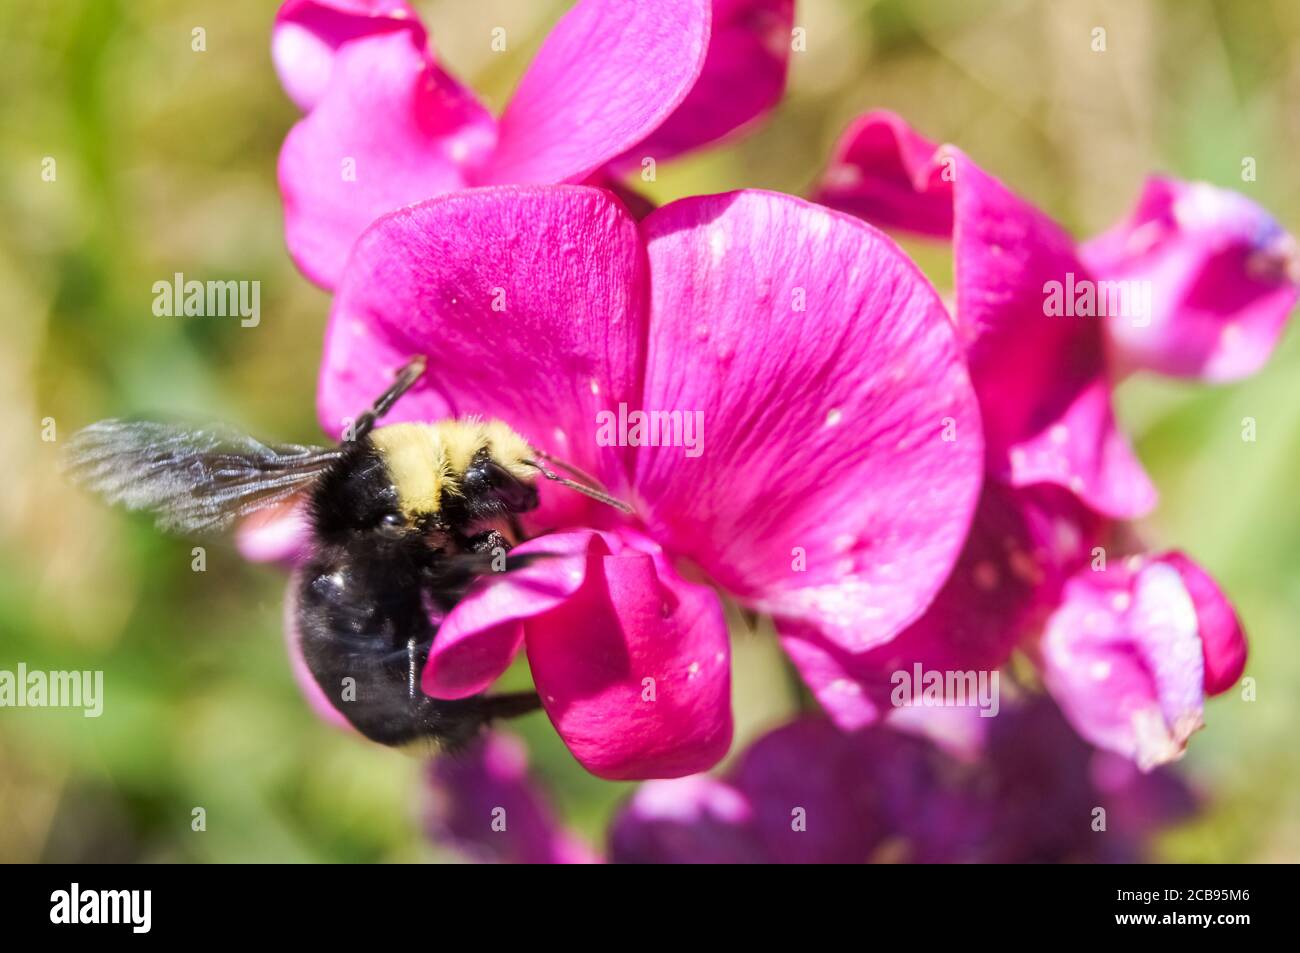 Bumblebee collecting pollen from a flower. Stock Photo